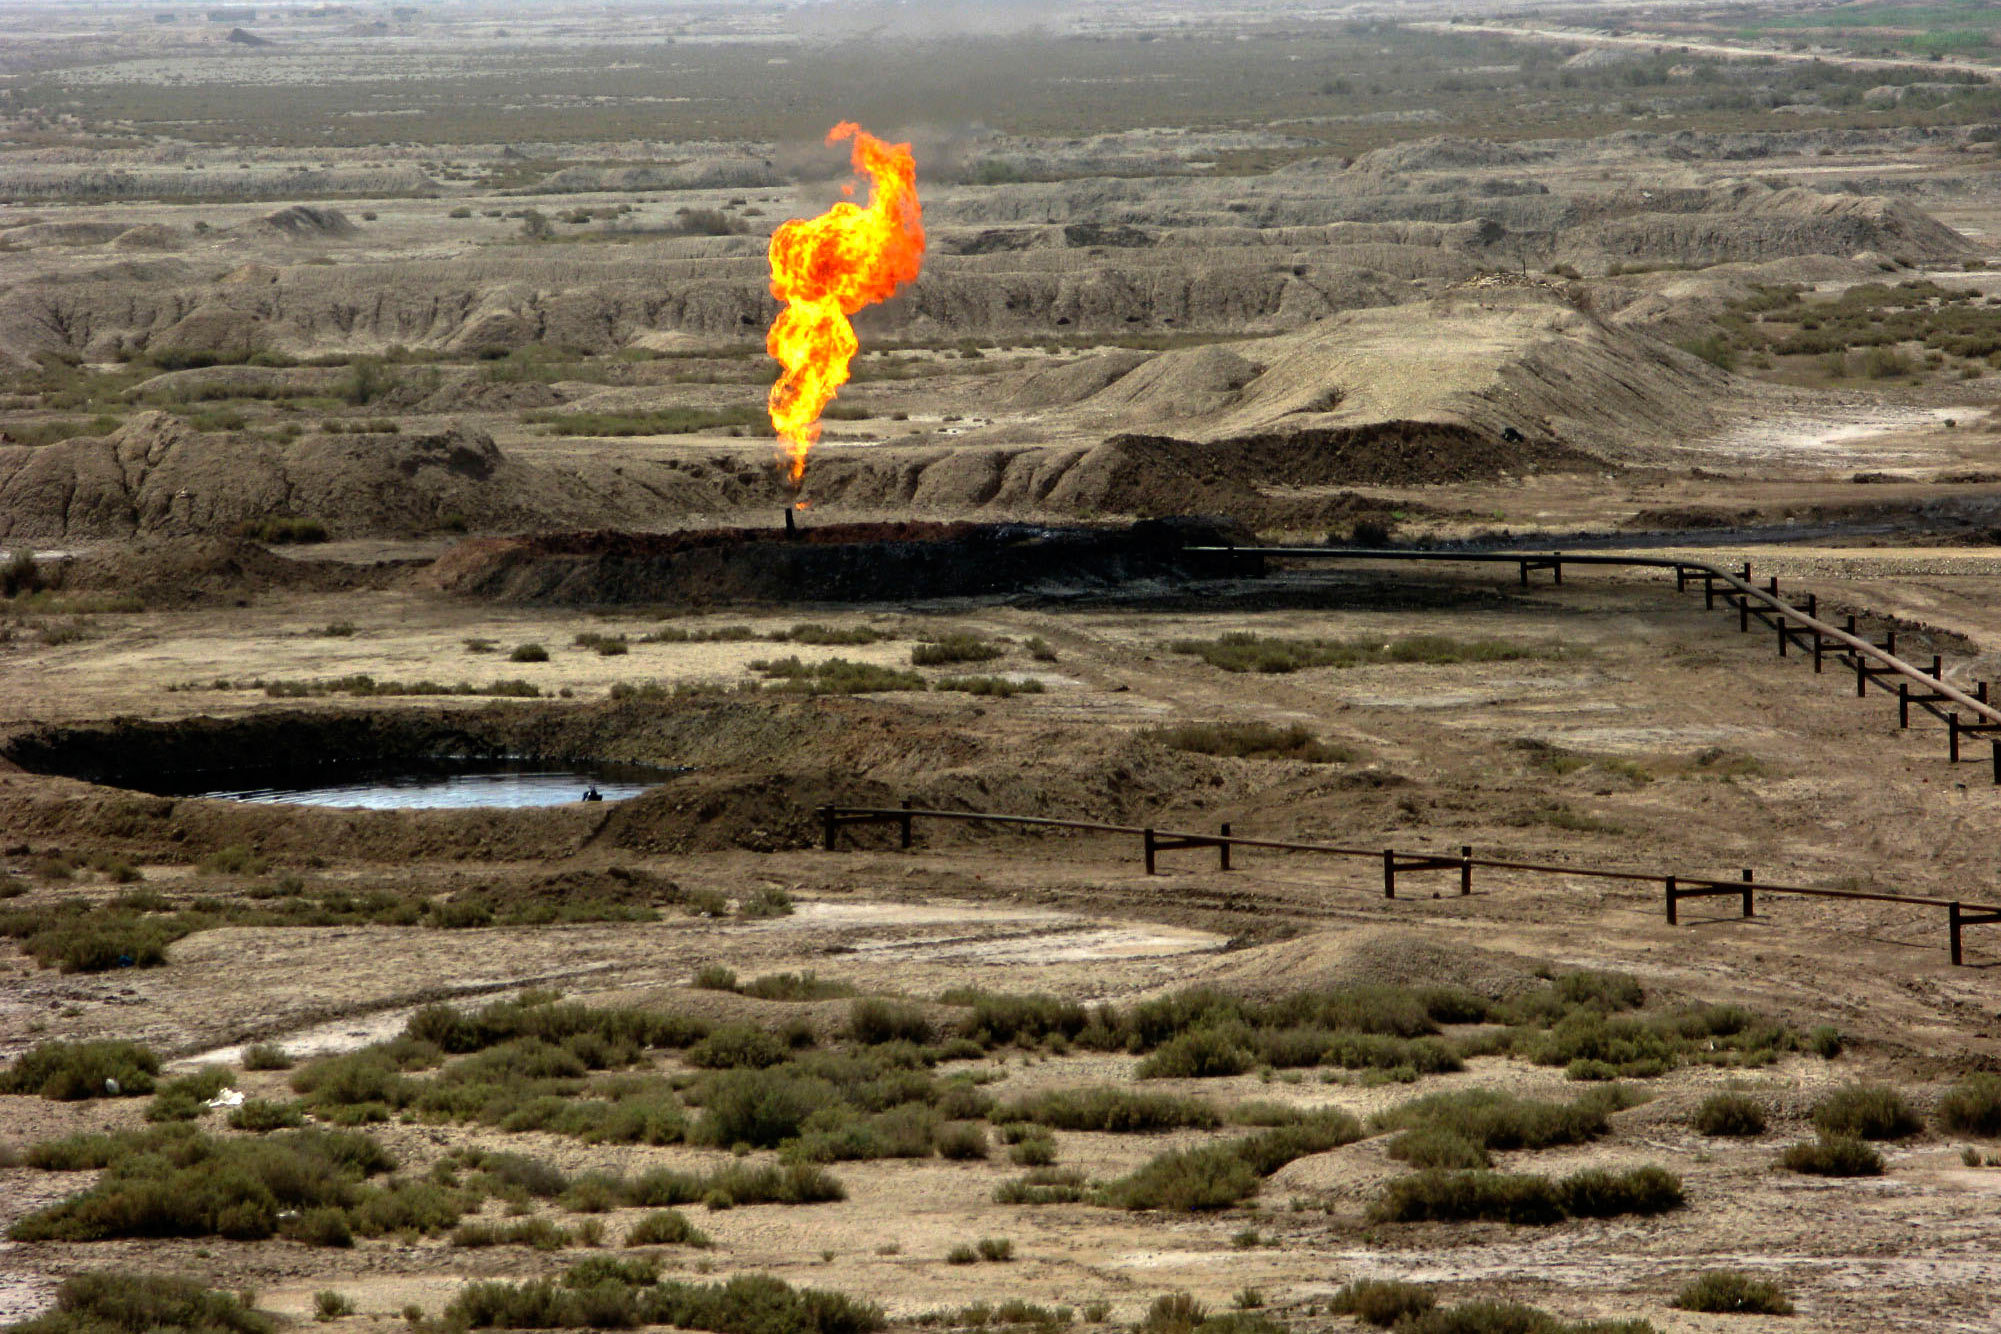 Iran to develop 4 oil fields based on new contract model